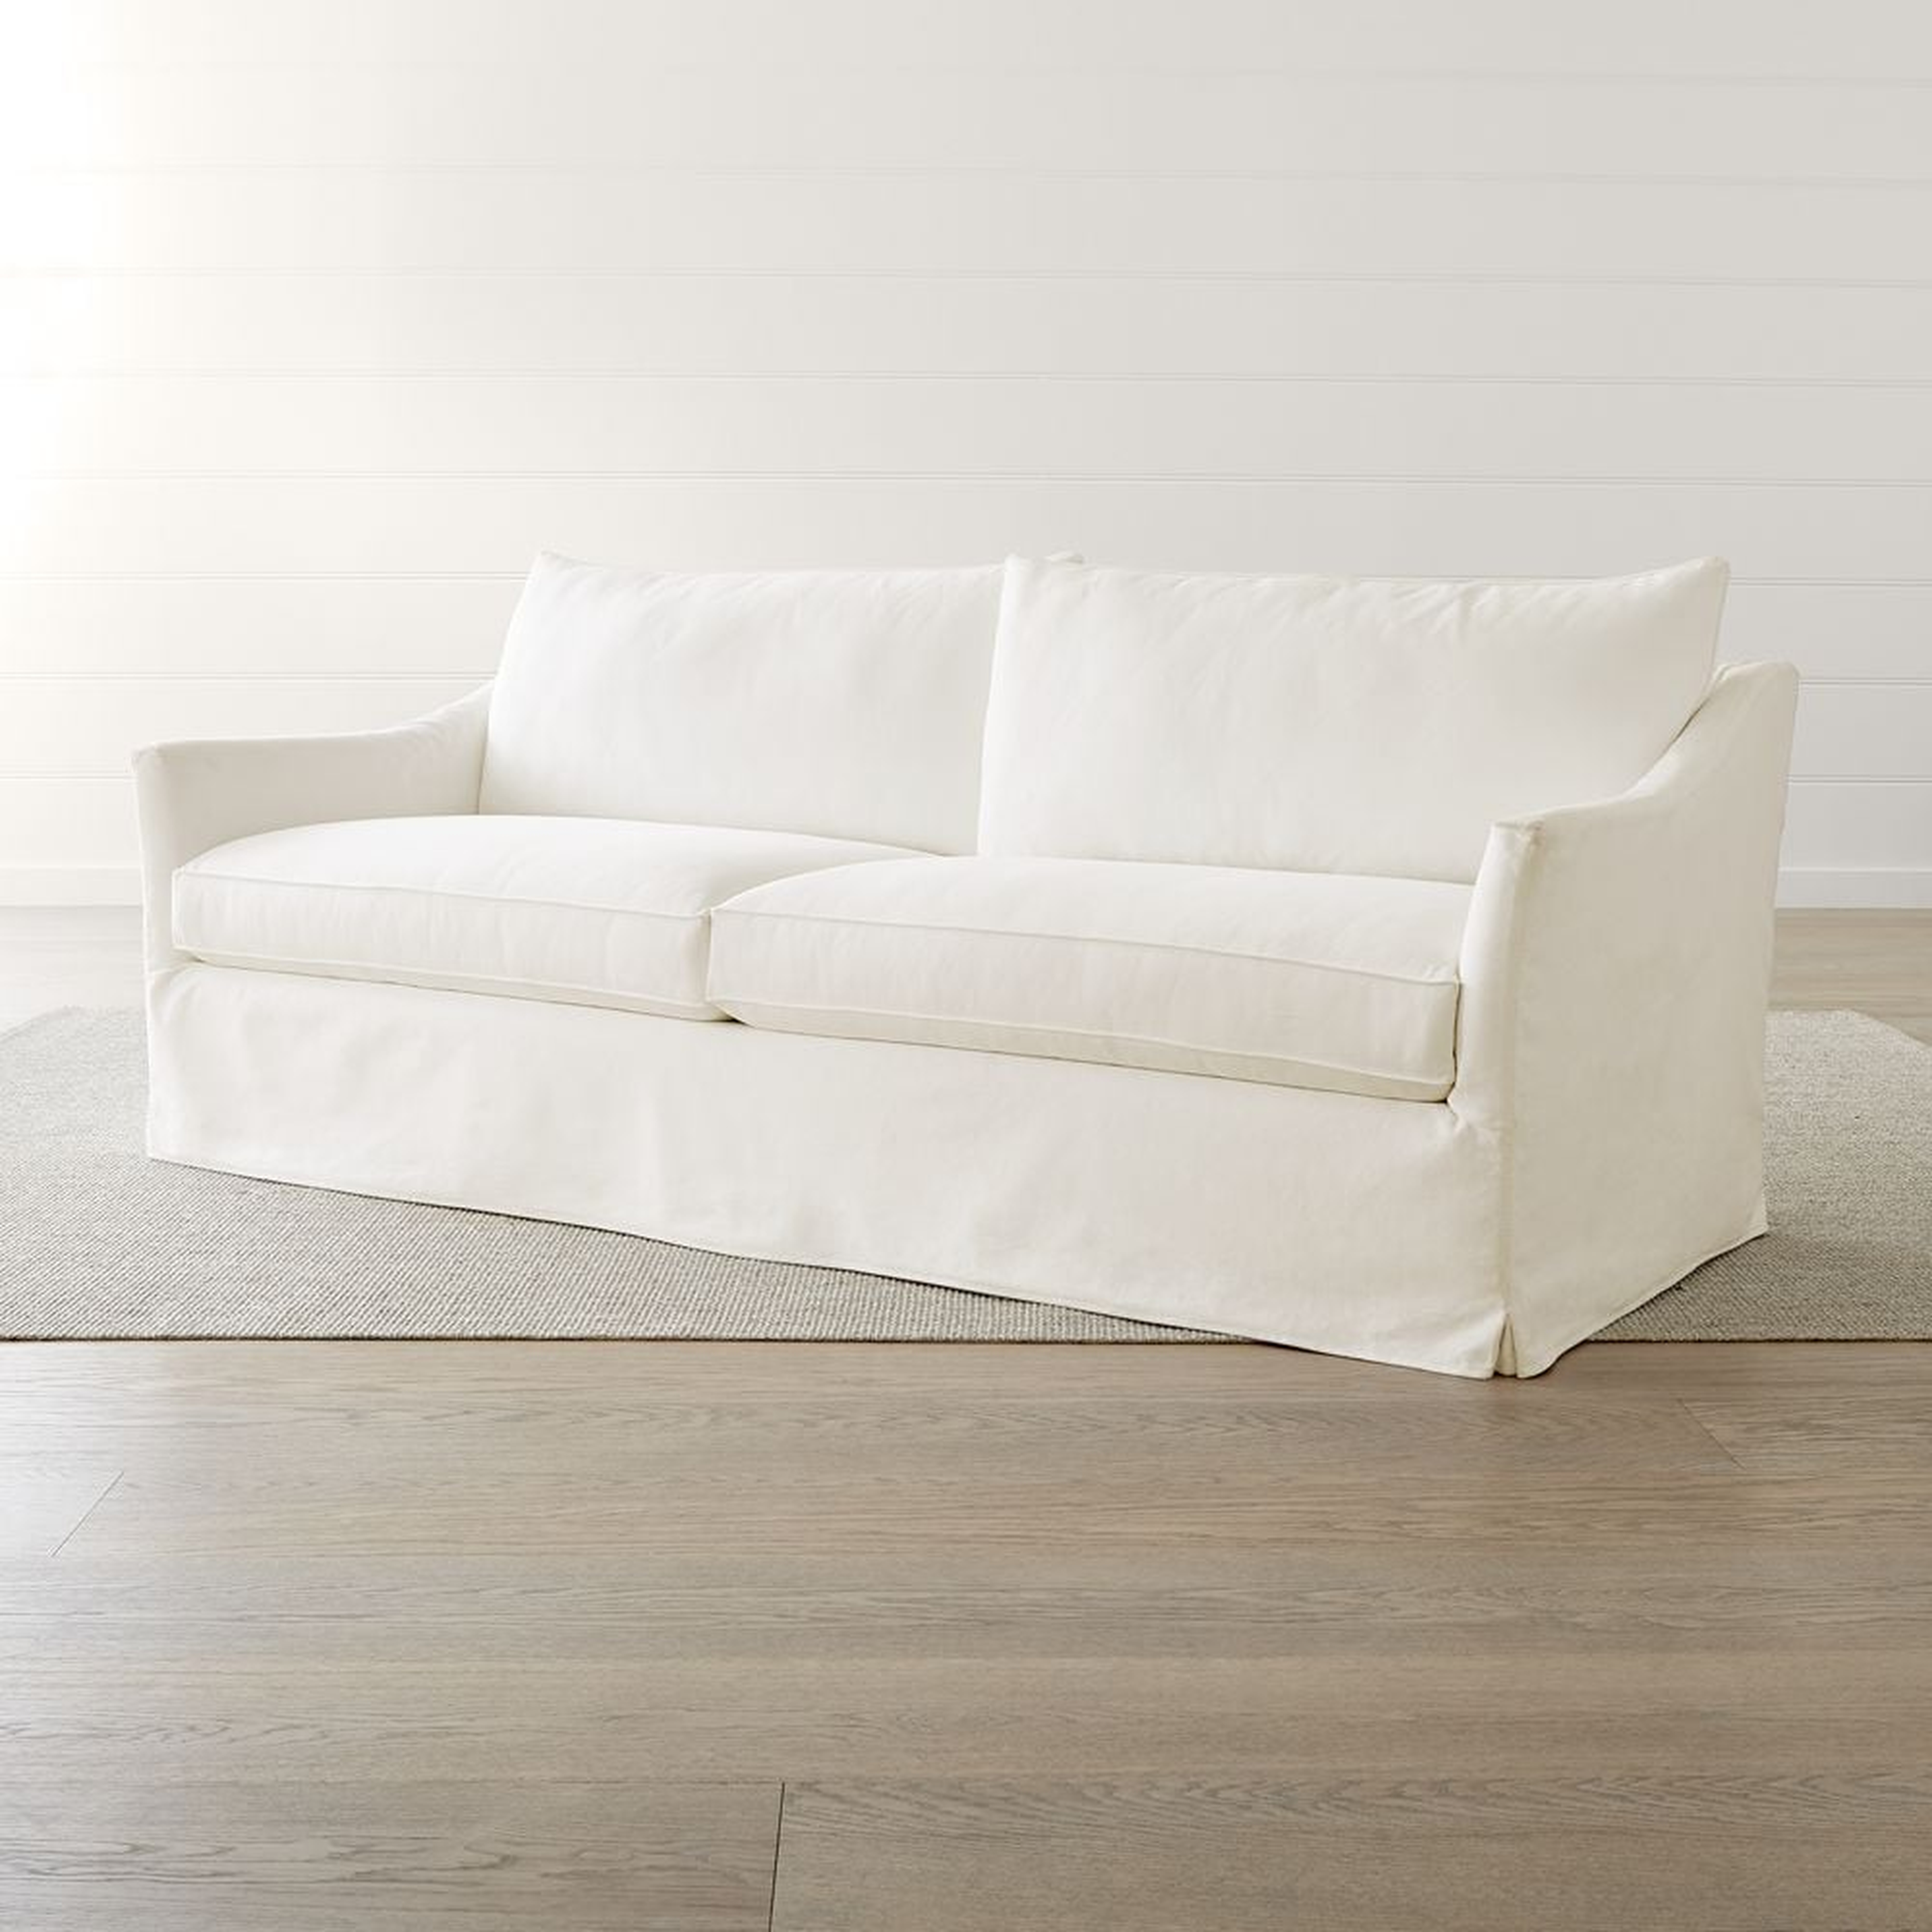 Keely Slipcovered Sofa - Crate and Barrel